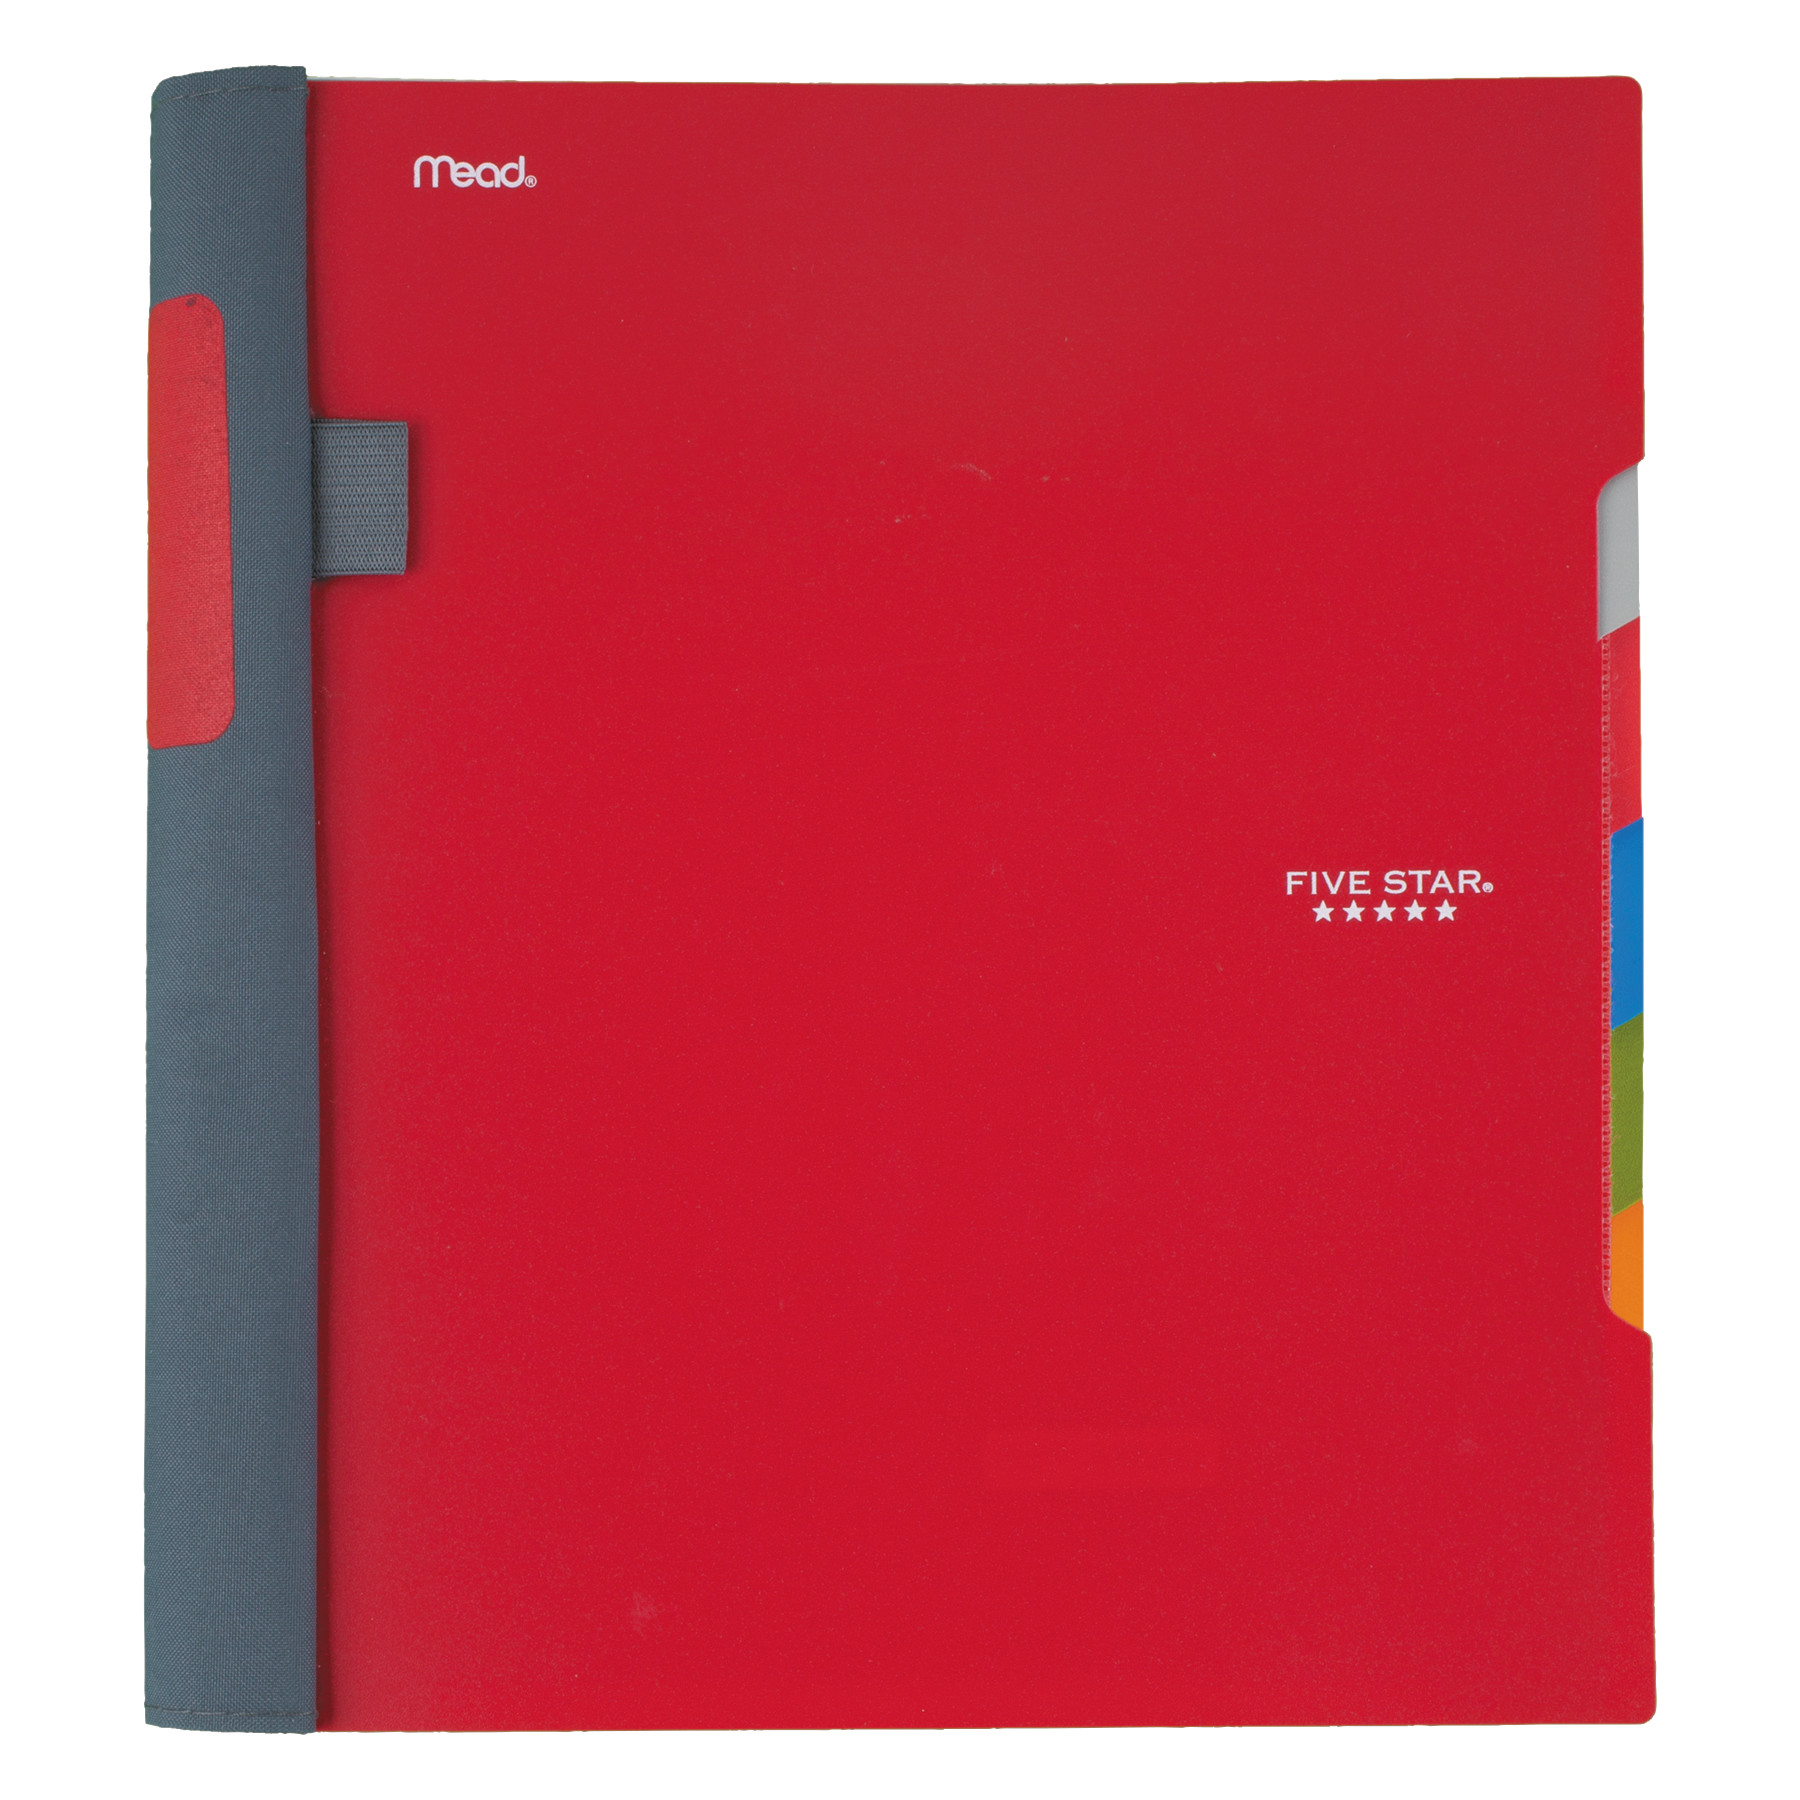 Five Star Advance 5 Subject College Ruled Notebook, Assorted (06326) - image 1 of 10